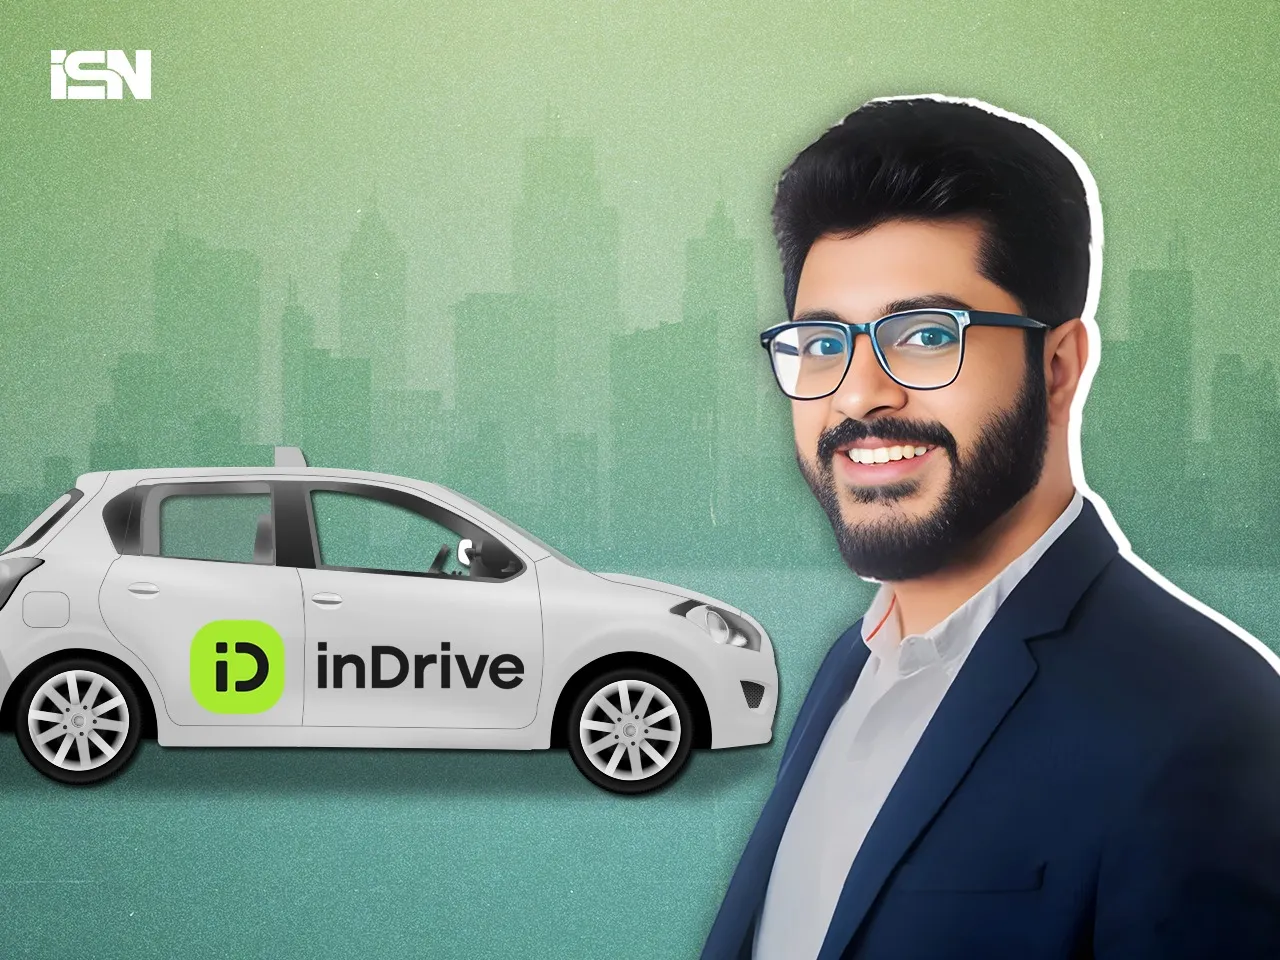 Mobility services platform inDrive appoints Pratip Mazumder as Country Manager for India